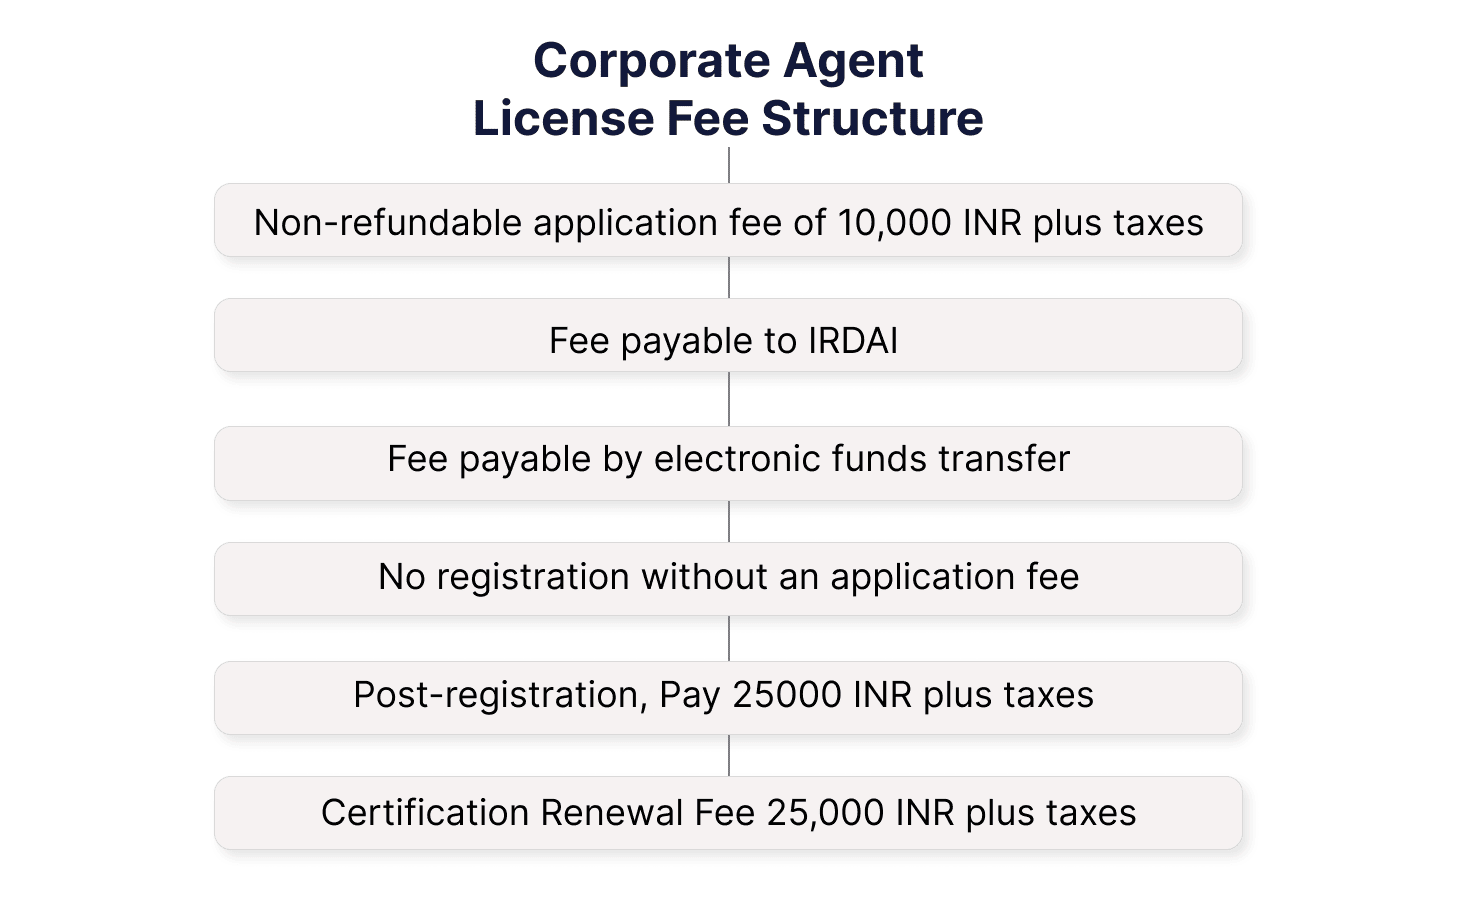 Corporate Agent License Fee Structure